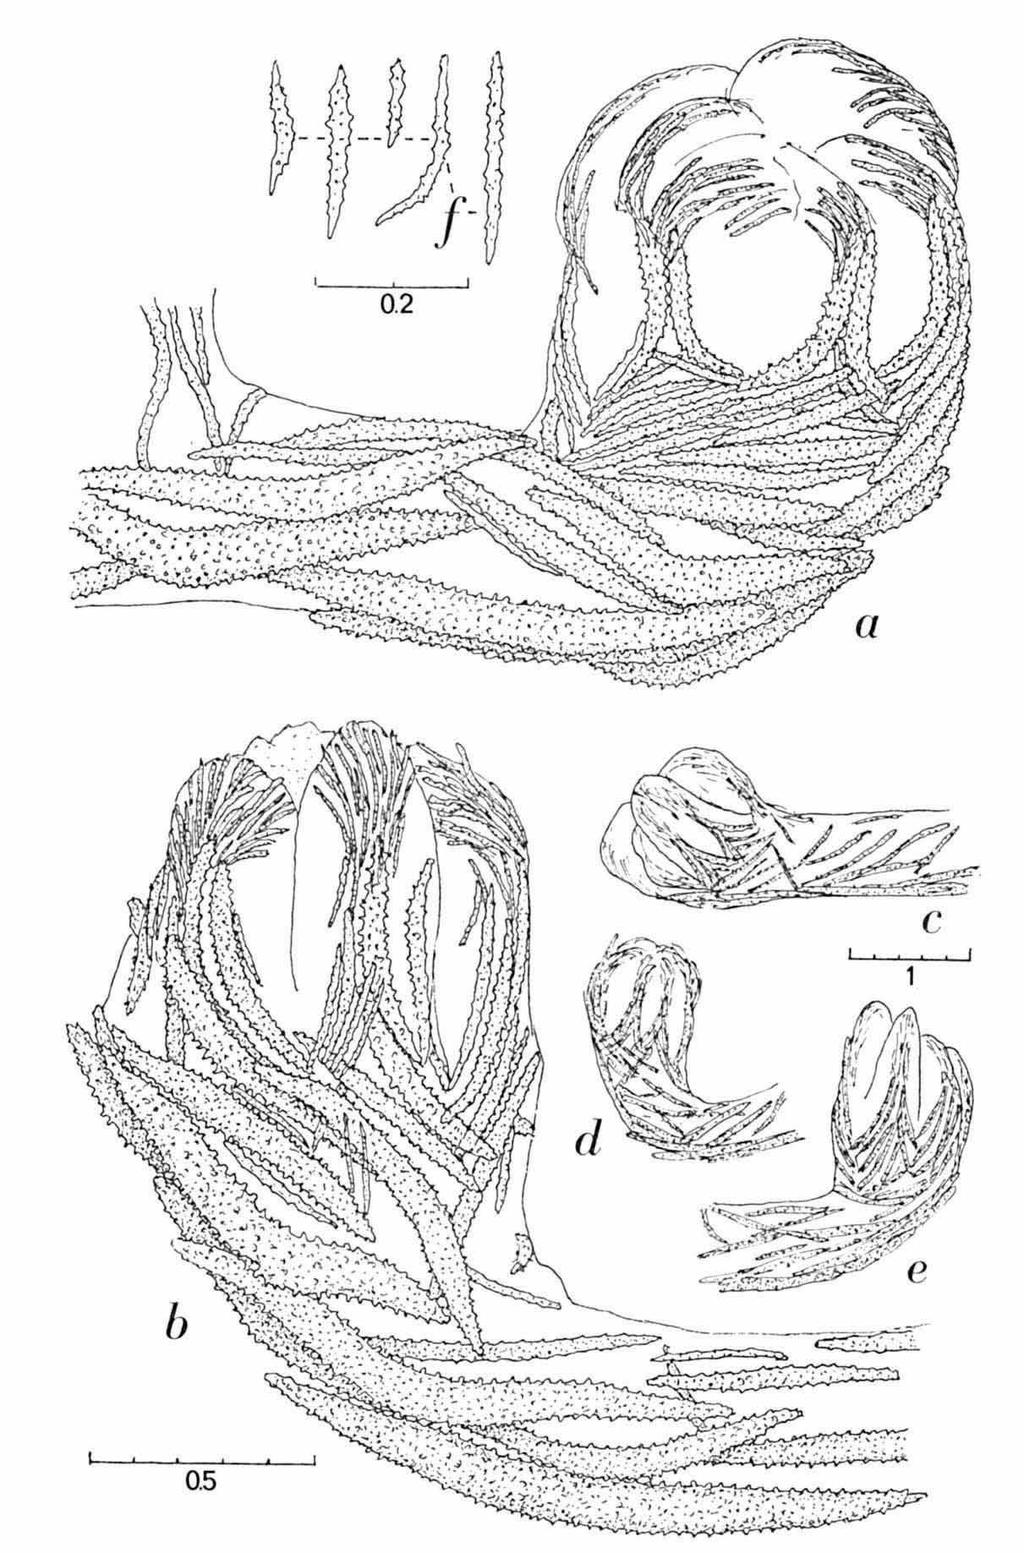 72 ZOOLOGISCHE MEDEDELINGEN 53 (1978) Fig. 8. Stereonephthya imbricans Thomson & Dean, Gordon Reef, Strait of Tiran, NS 13293. α-e, polyps; ƒ, sclerites from tentacles.